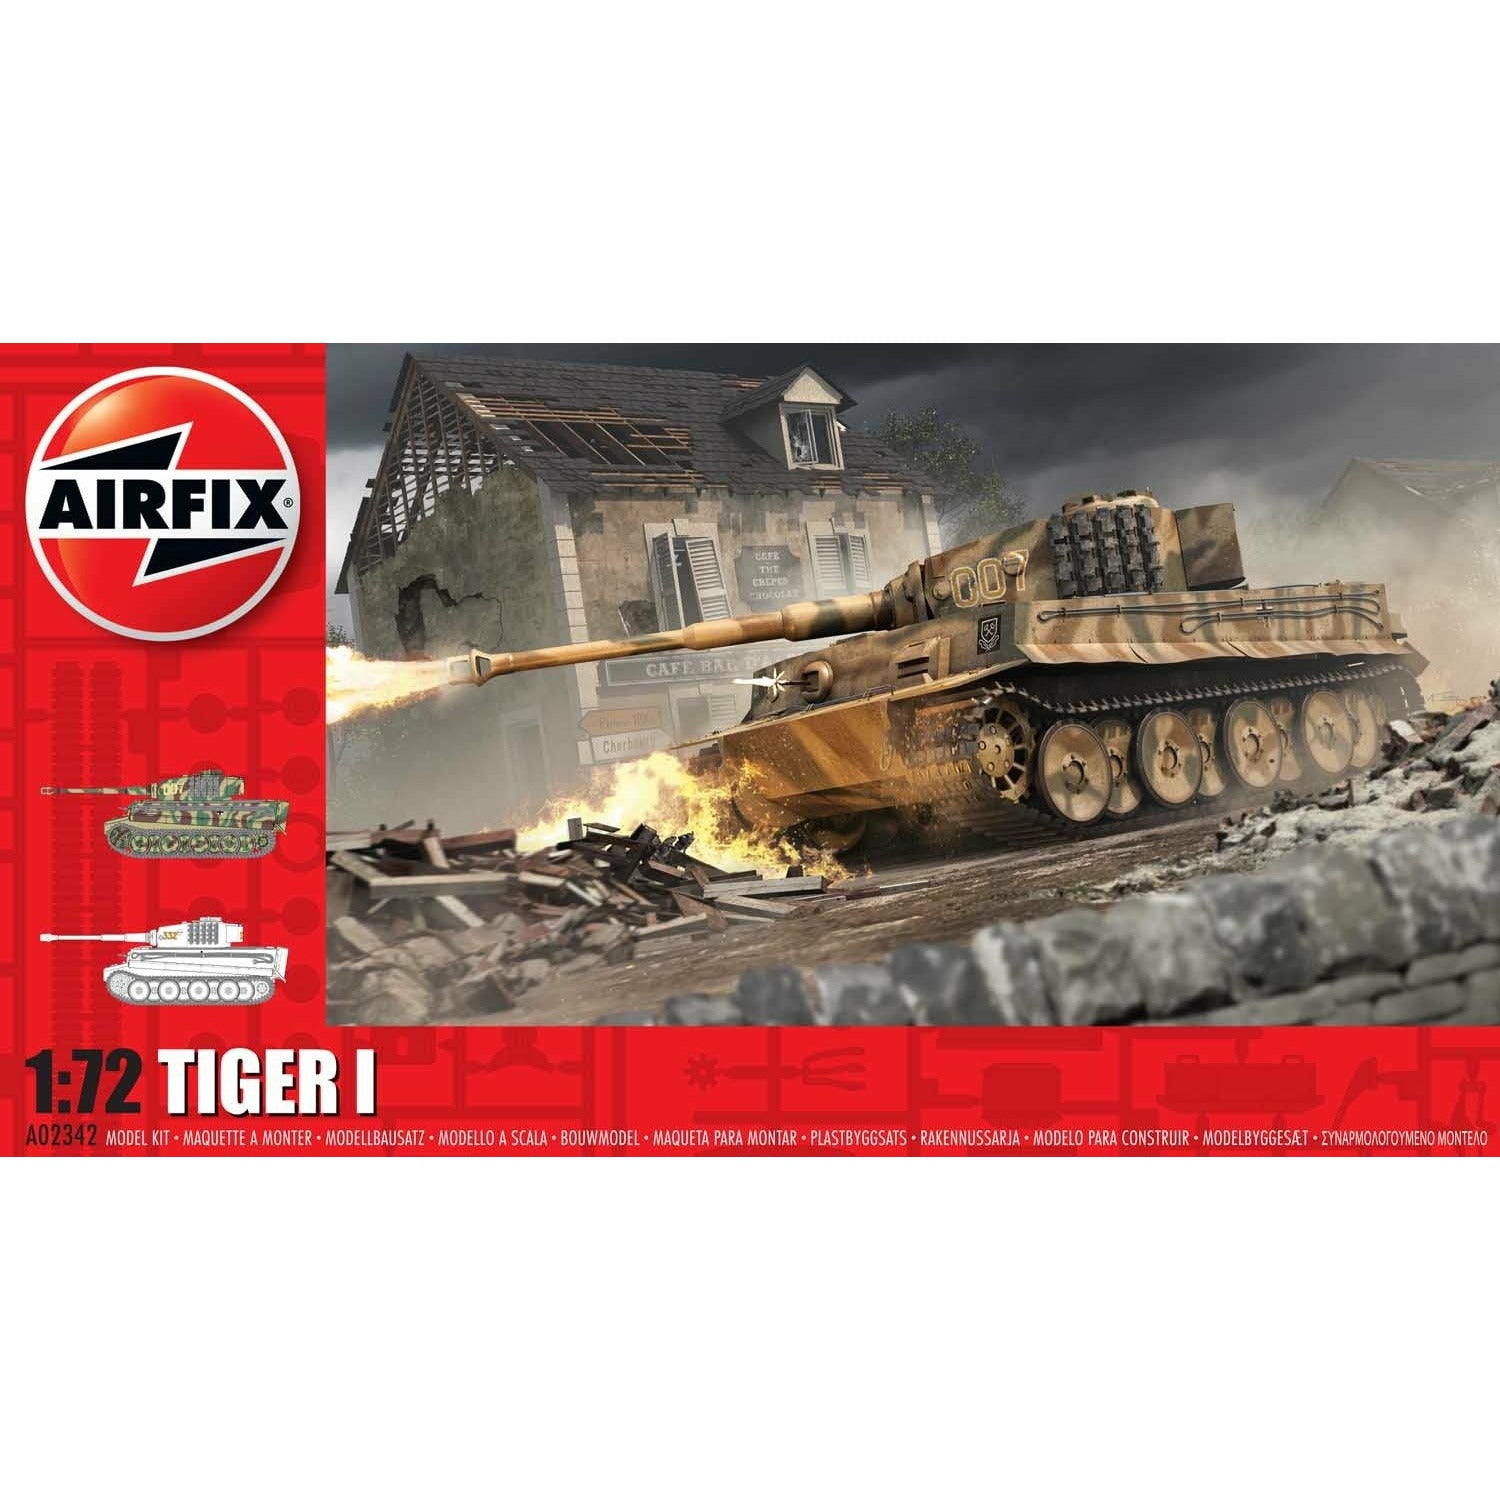 Tiger I 1/72 #02342 by Airfix